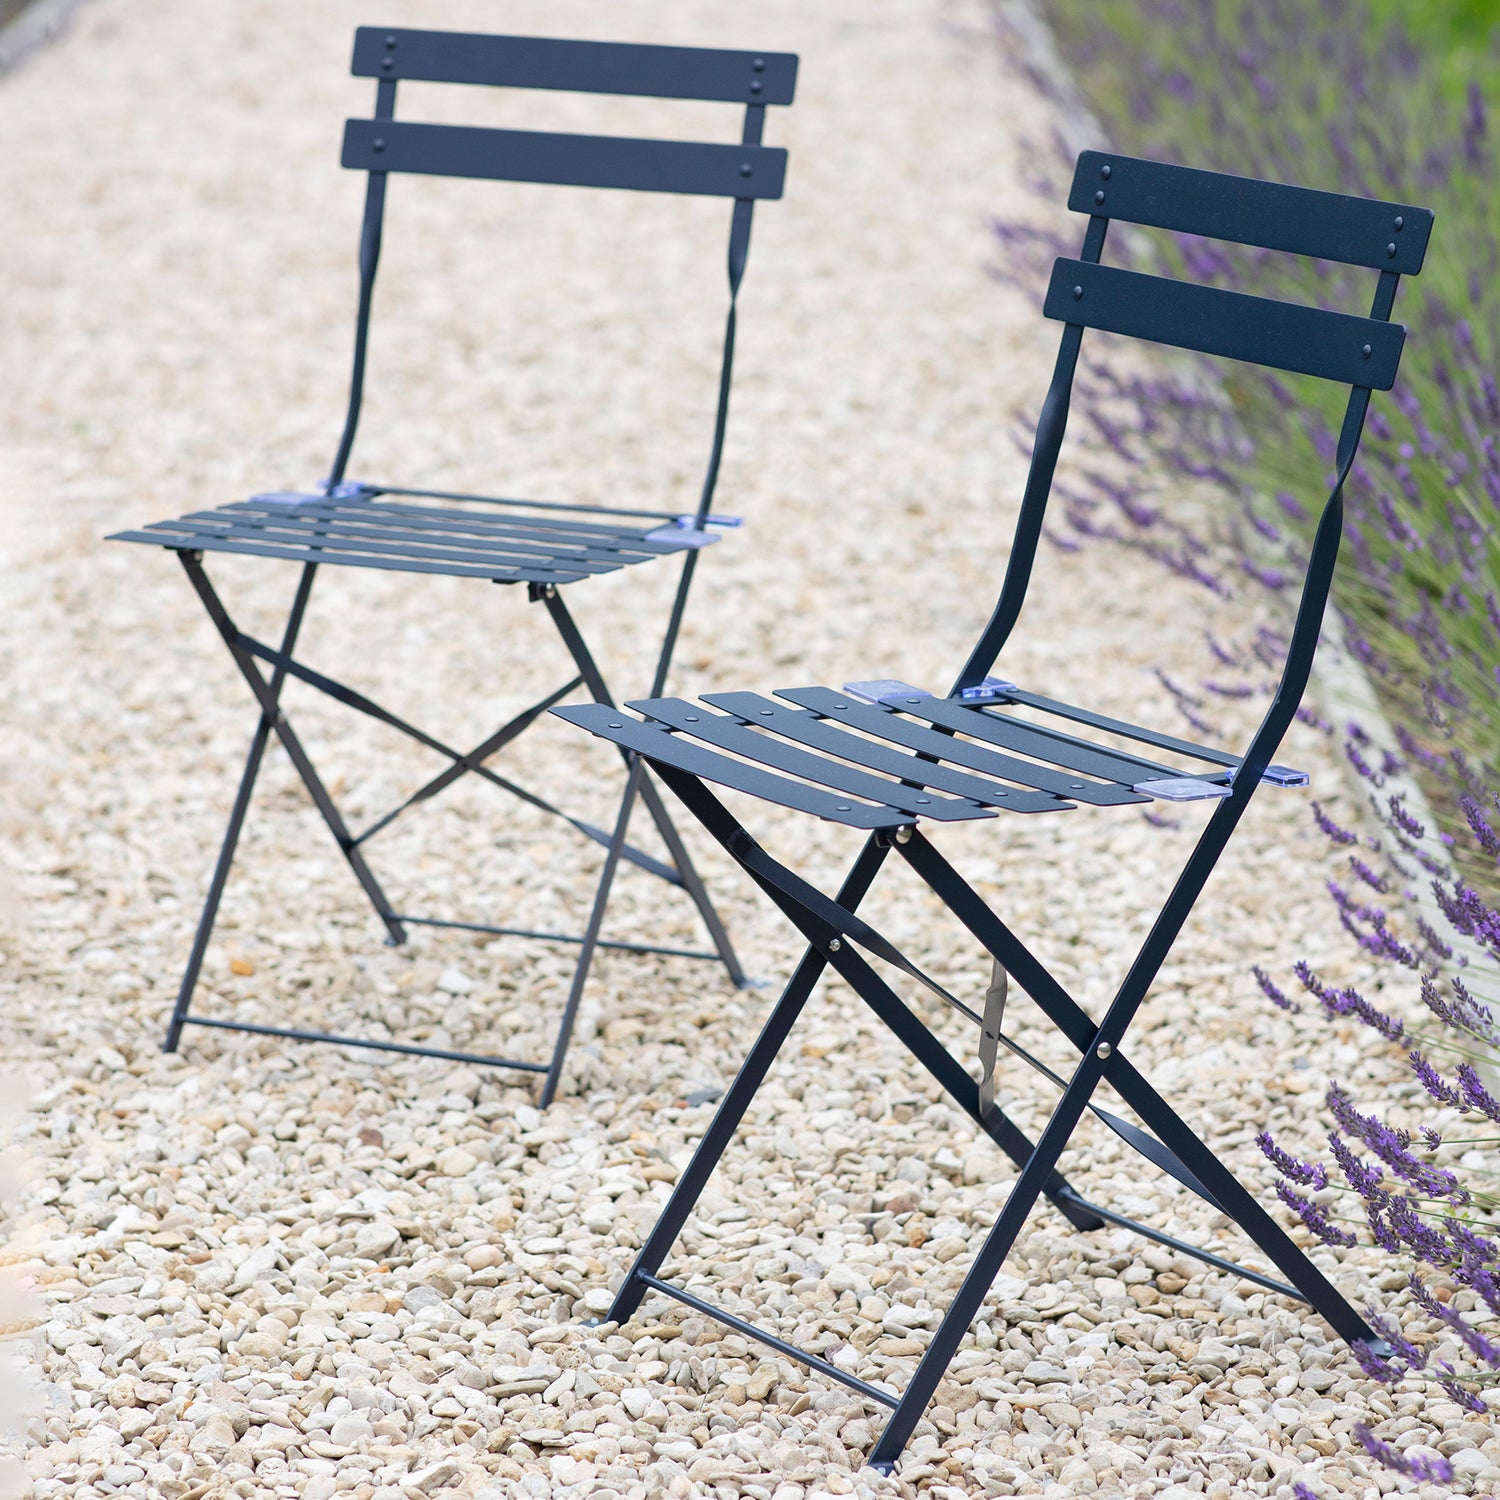 Pair of Rive Droite Bistro Outdoor Chairs Ink Steel by Garden Trading